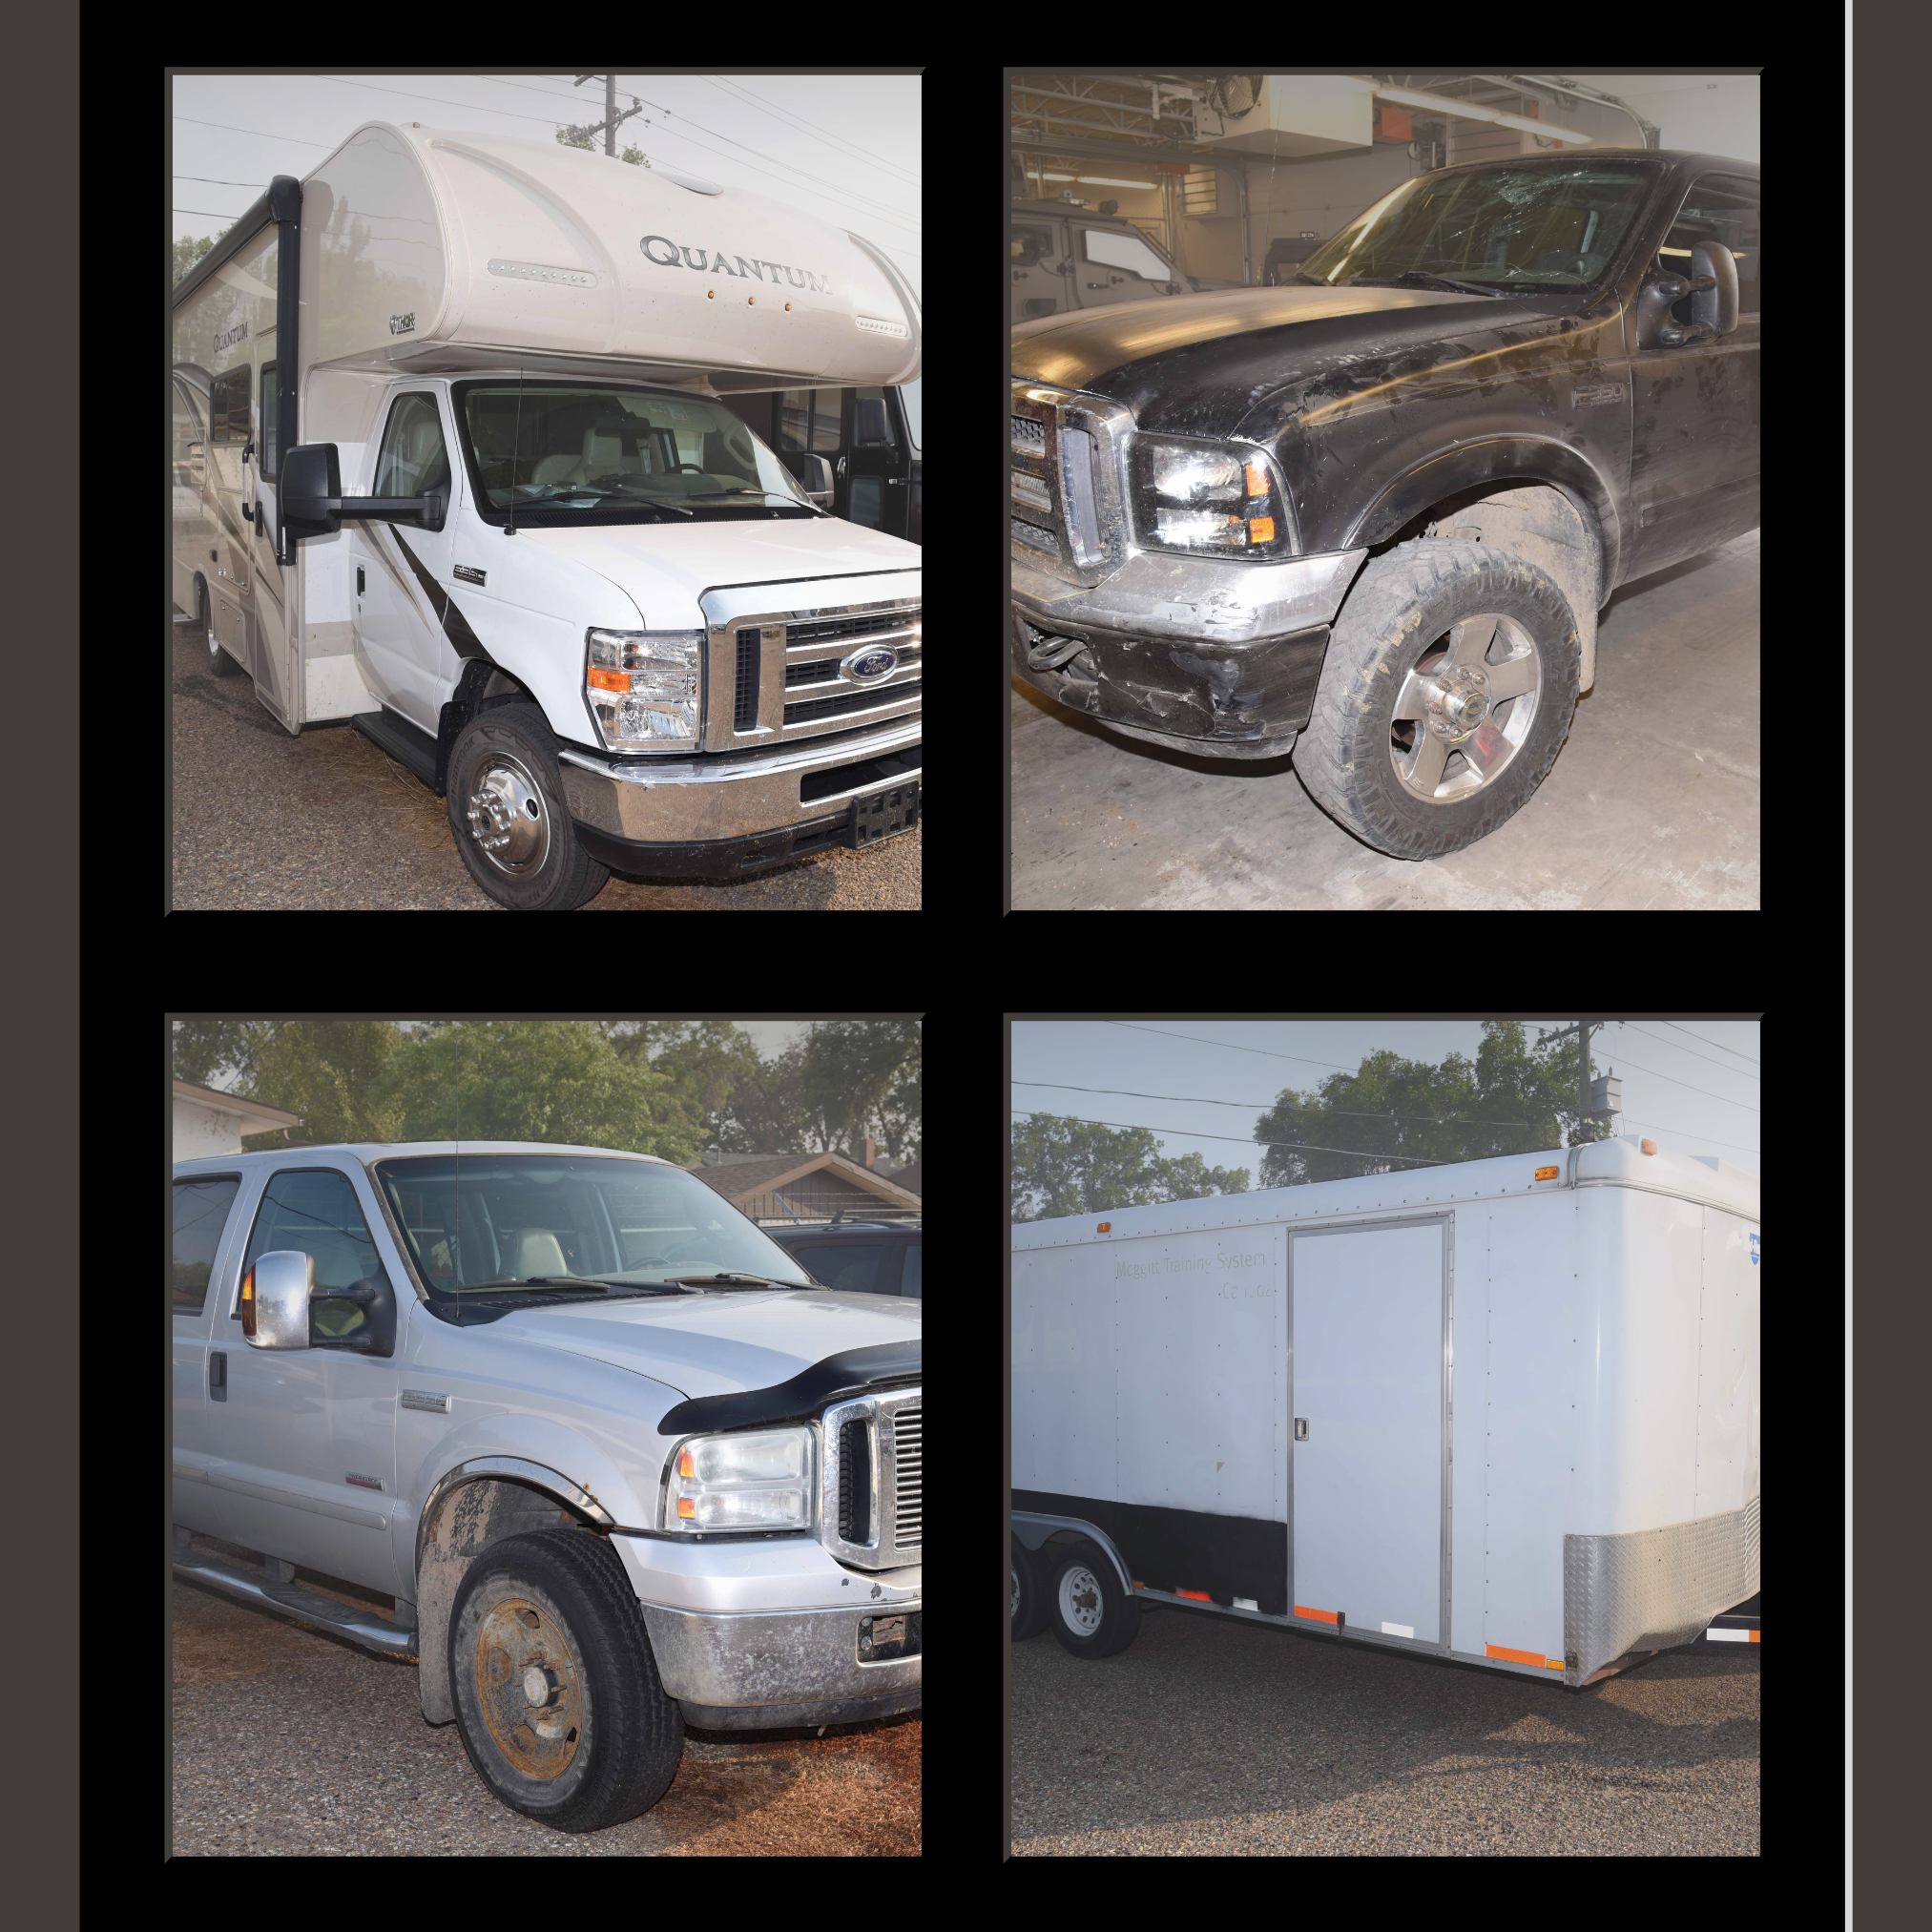 Stolen vehicles recovered by Medicine Hat property crimes team